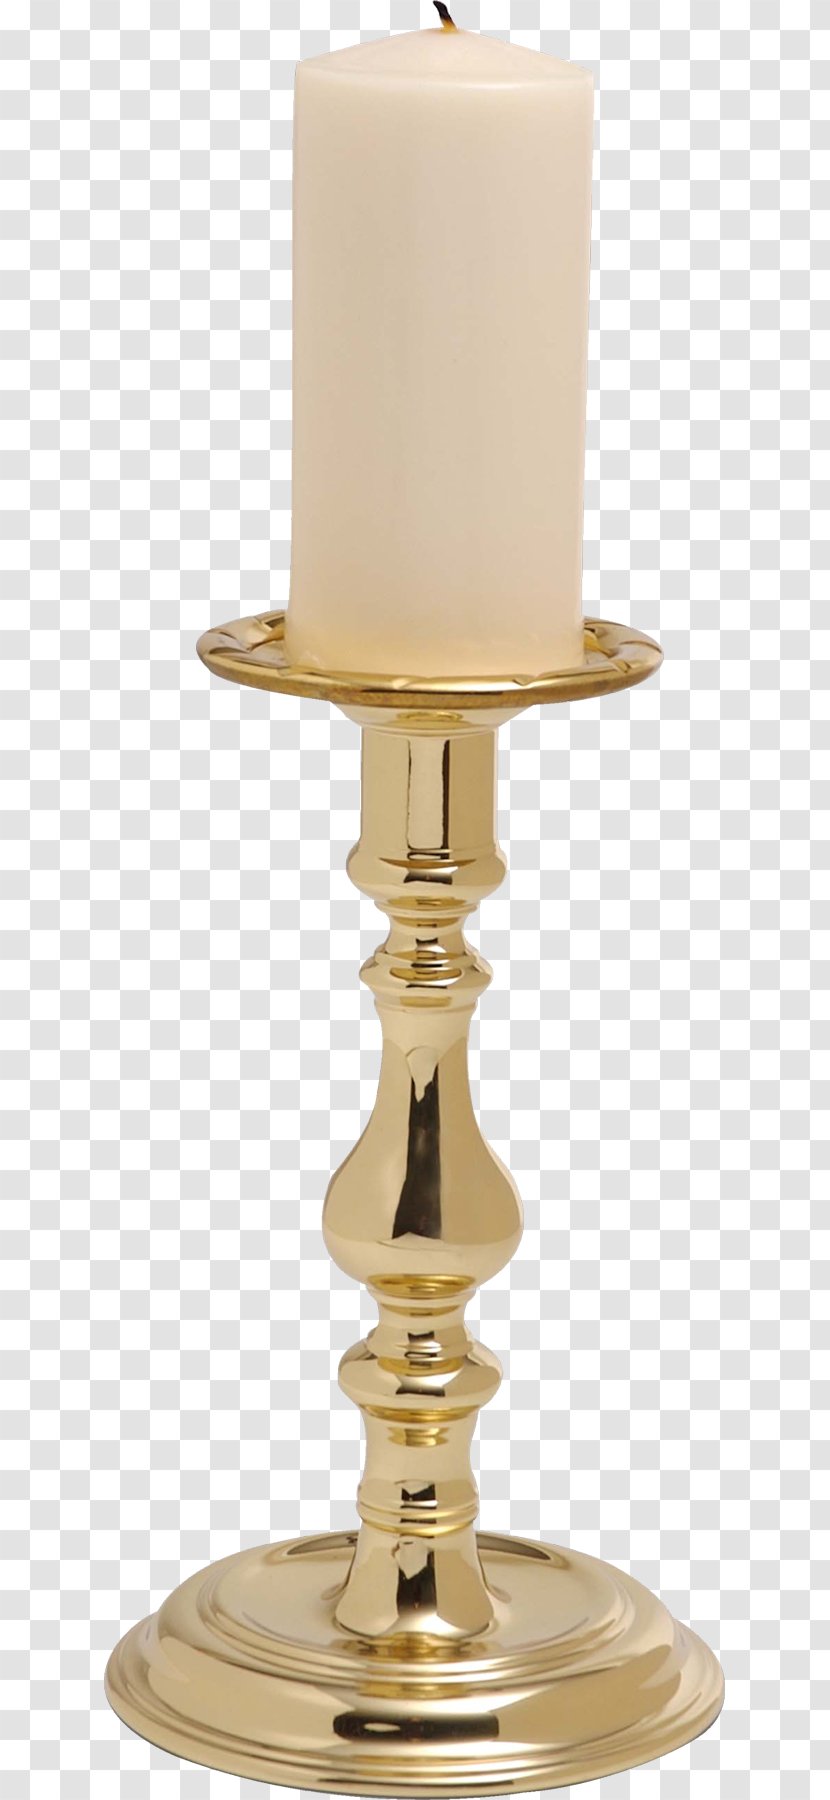 Candlestick Table Tealight Glass - Dining Room - Candles Transparent PNG